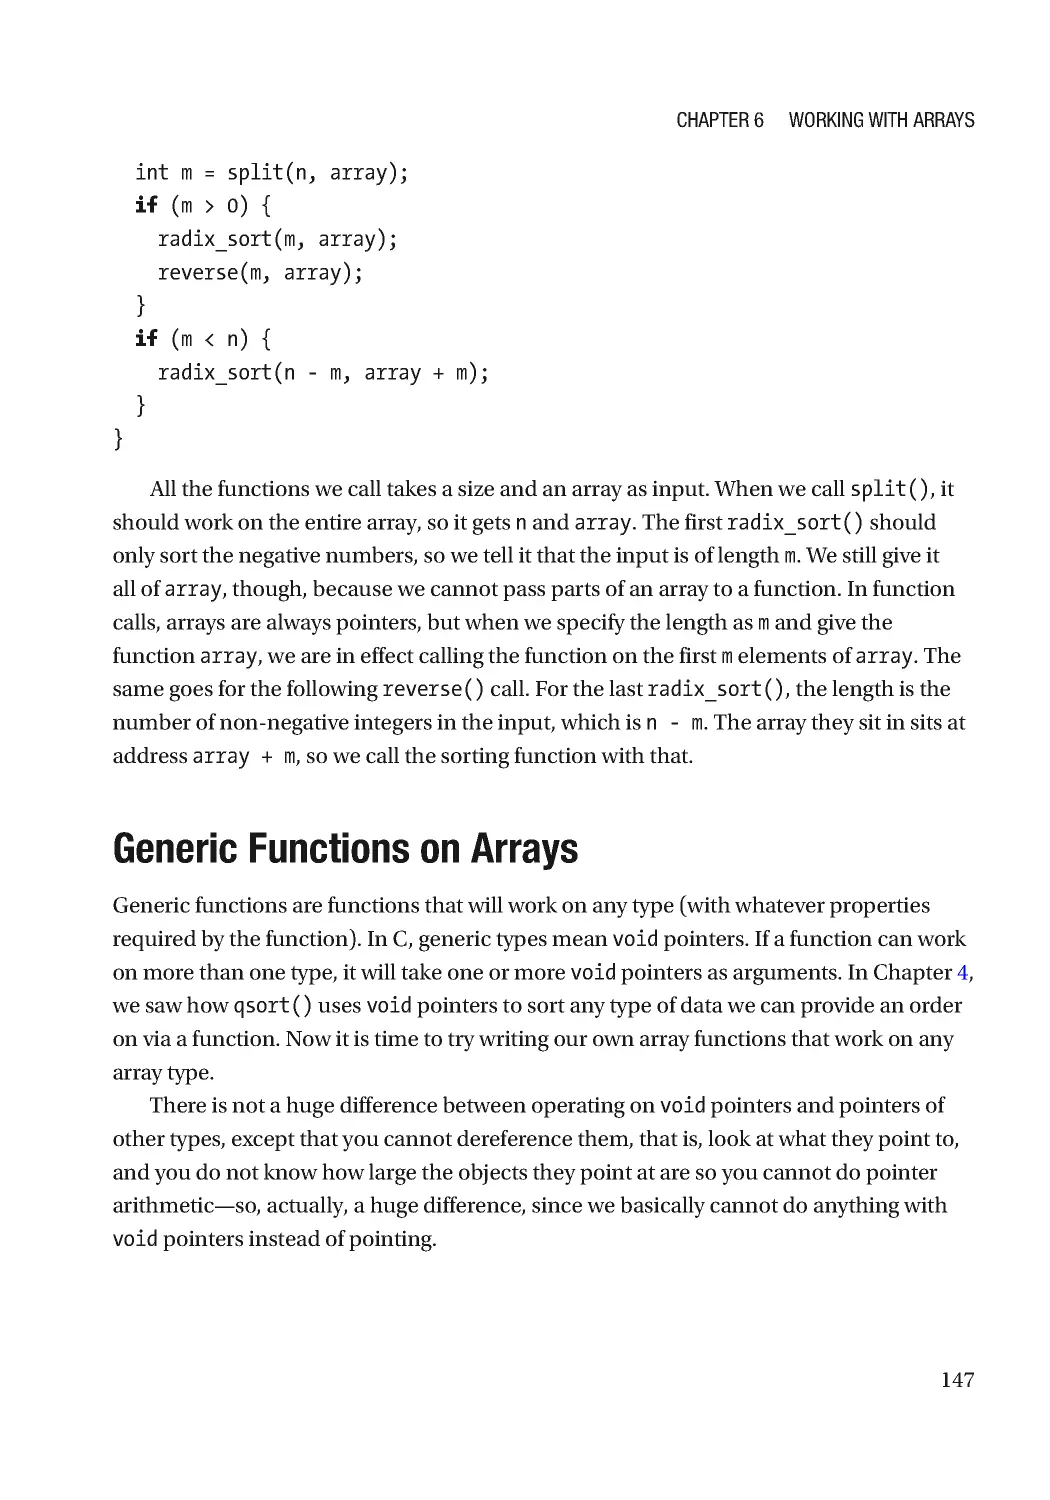 Generic Functions on Arrays